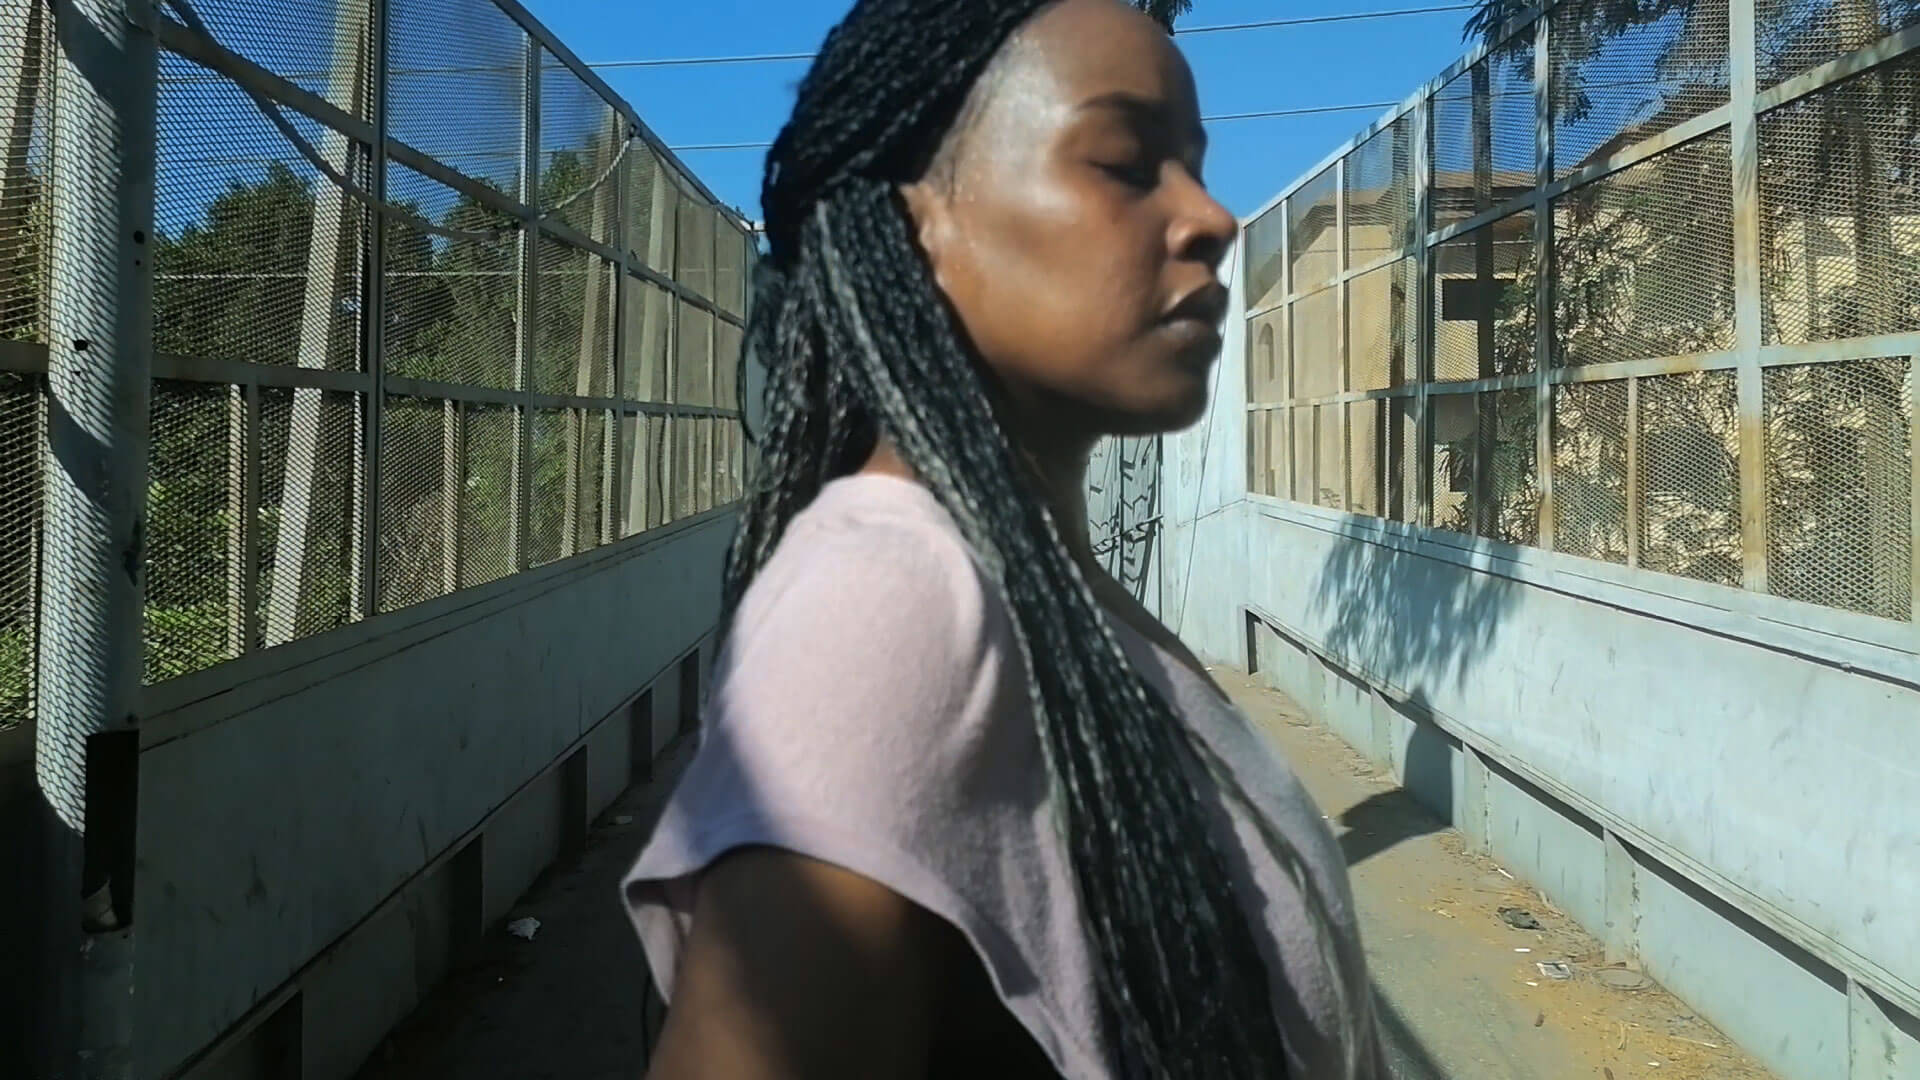 A black woman with long braids stands in profile with her eyes closed on a bridge, wearing a pink t-shirt against a blue sky.